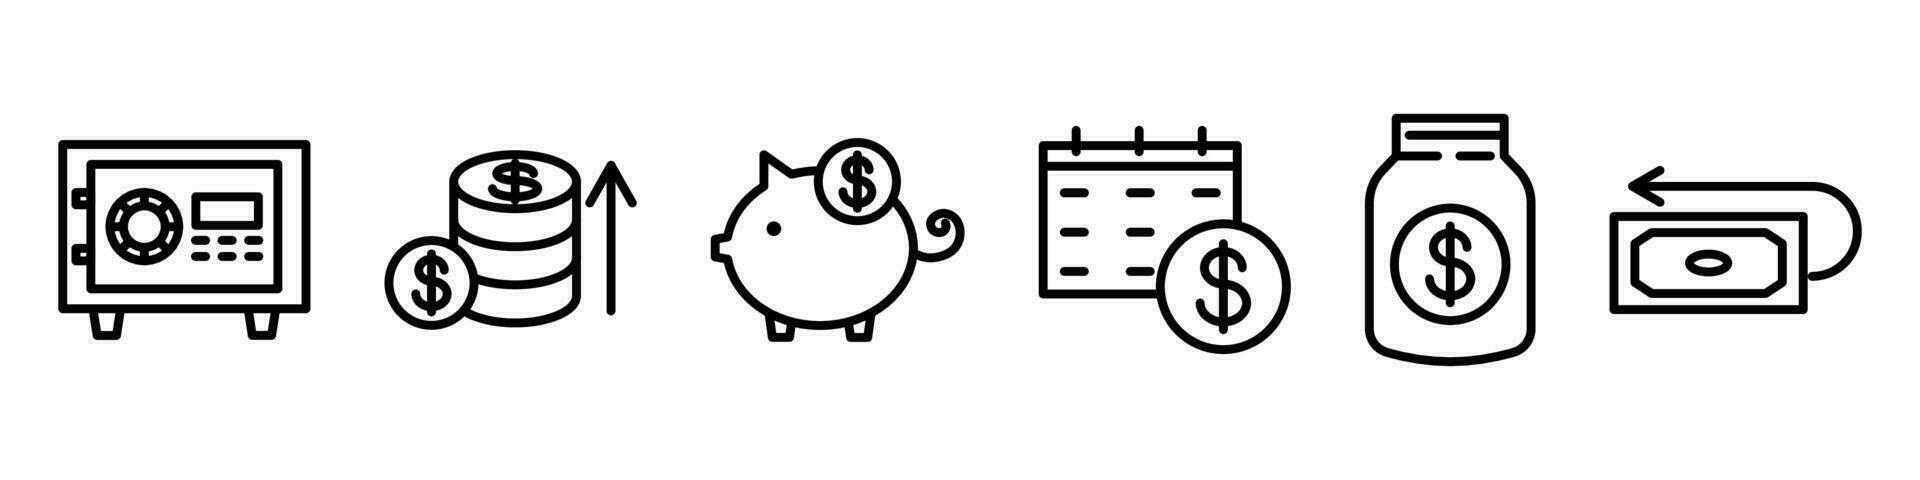 Vector money savings icon set. Editable stroke. Collection of line business icons related to investment and money accumulation. Finance concept.